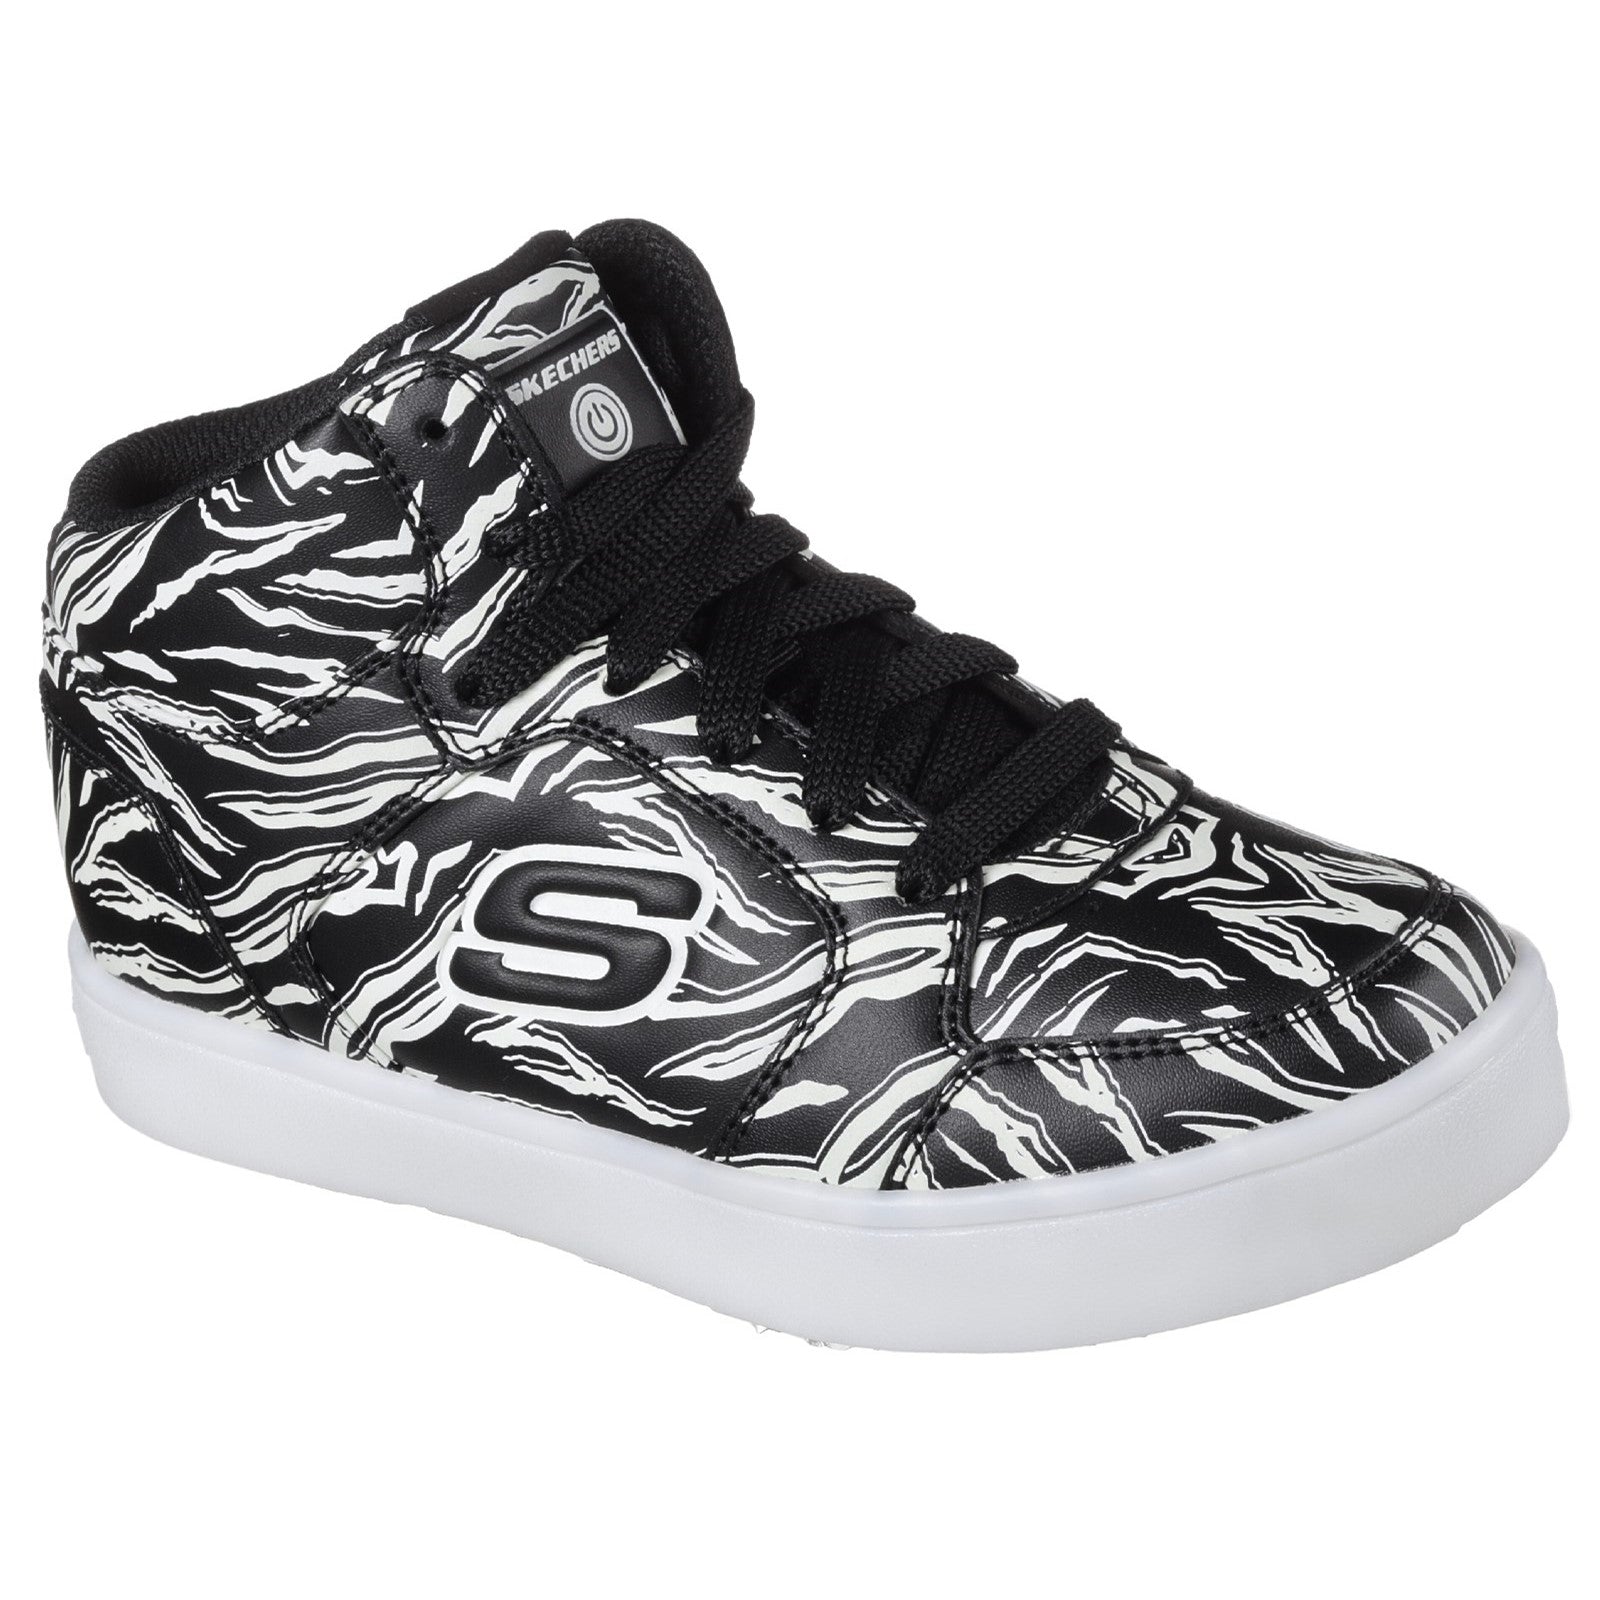 Skechers Energy Lights Outglow Lace-Up High Top Shoes